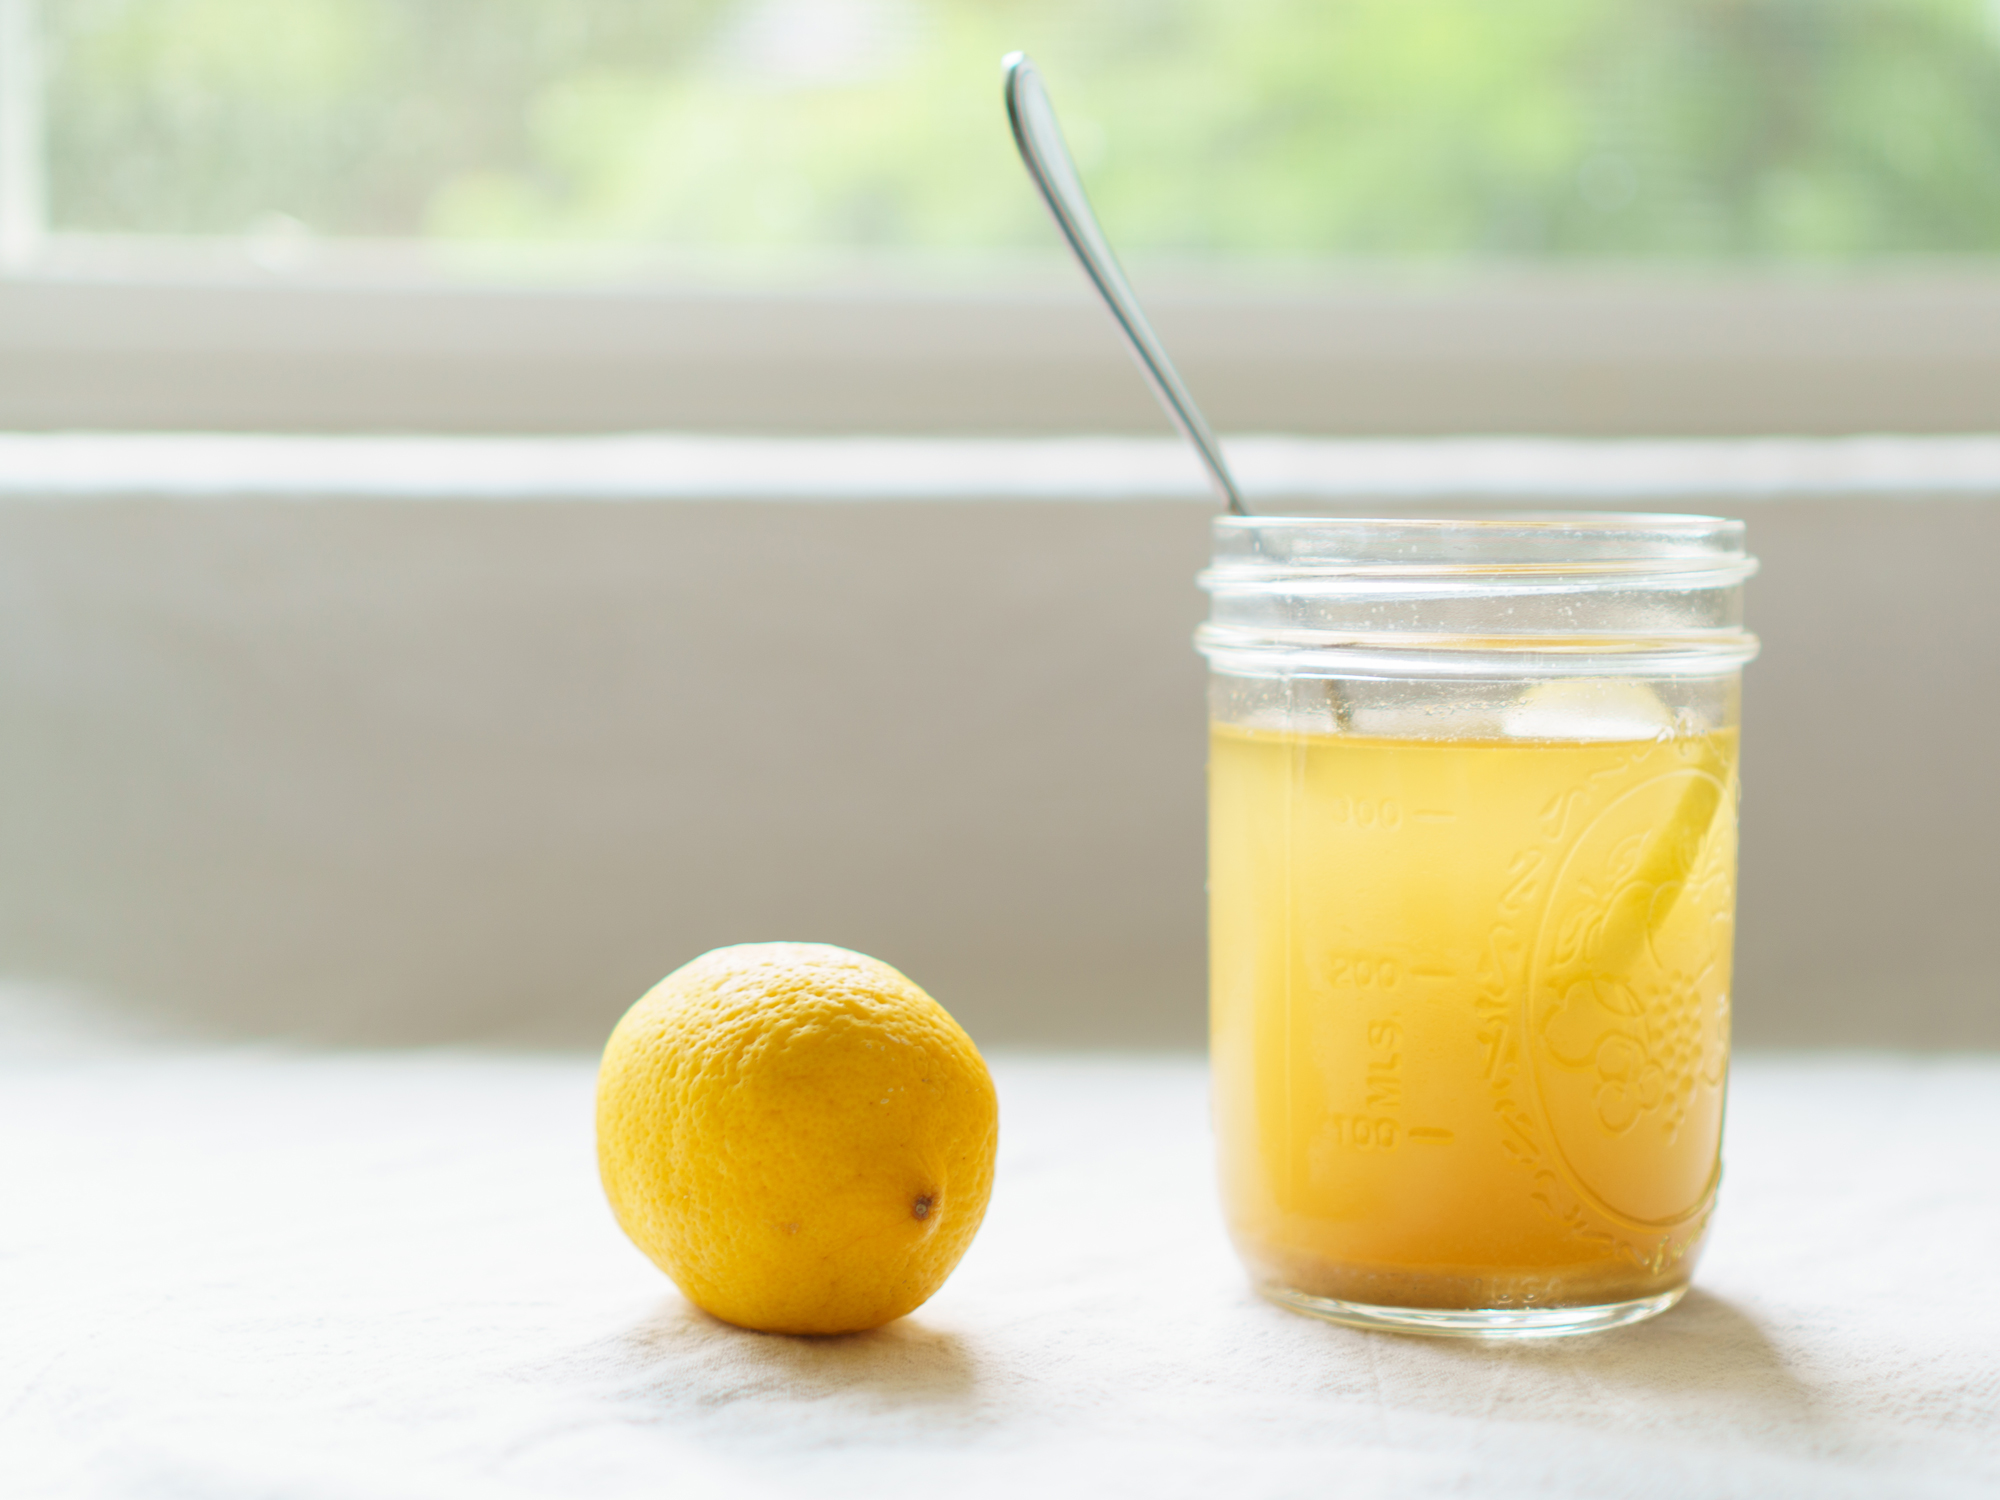 Hydrate, alkalize and energize with this 3-ingredient tonic